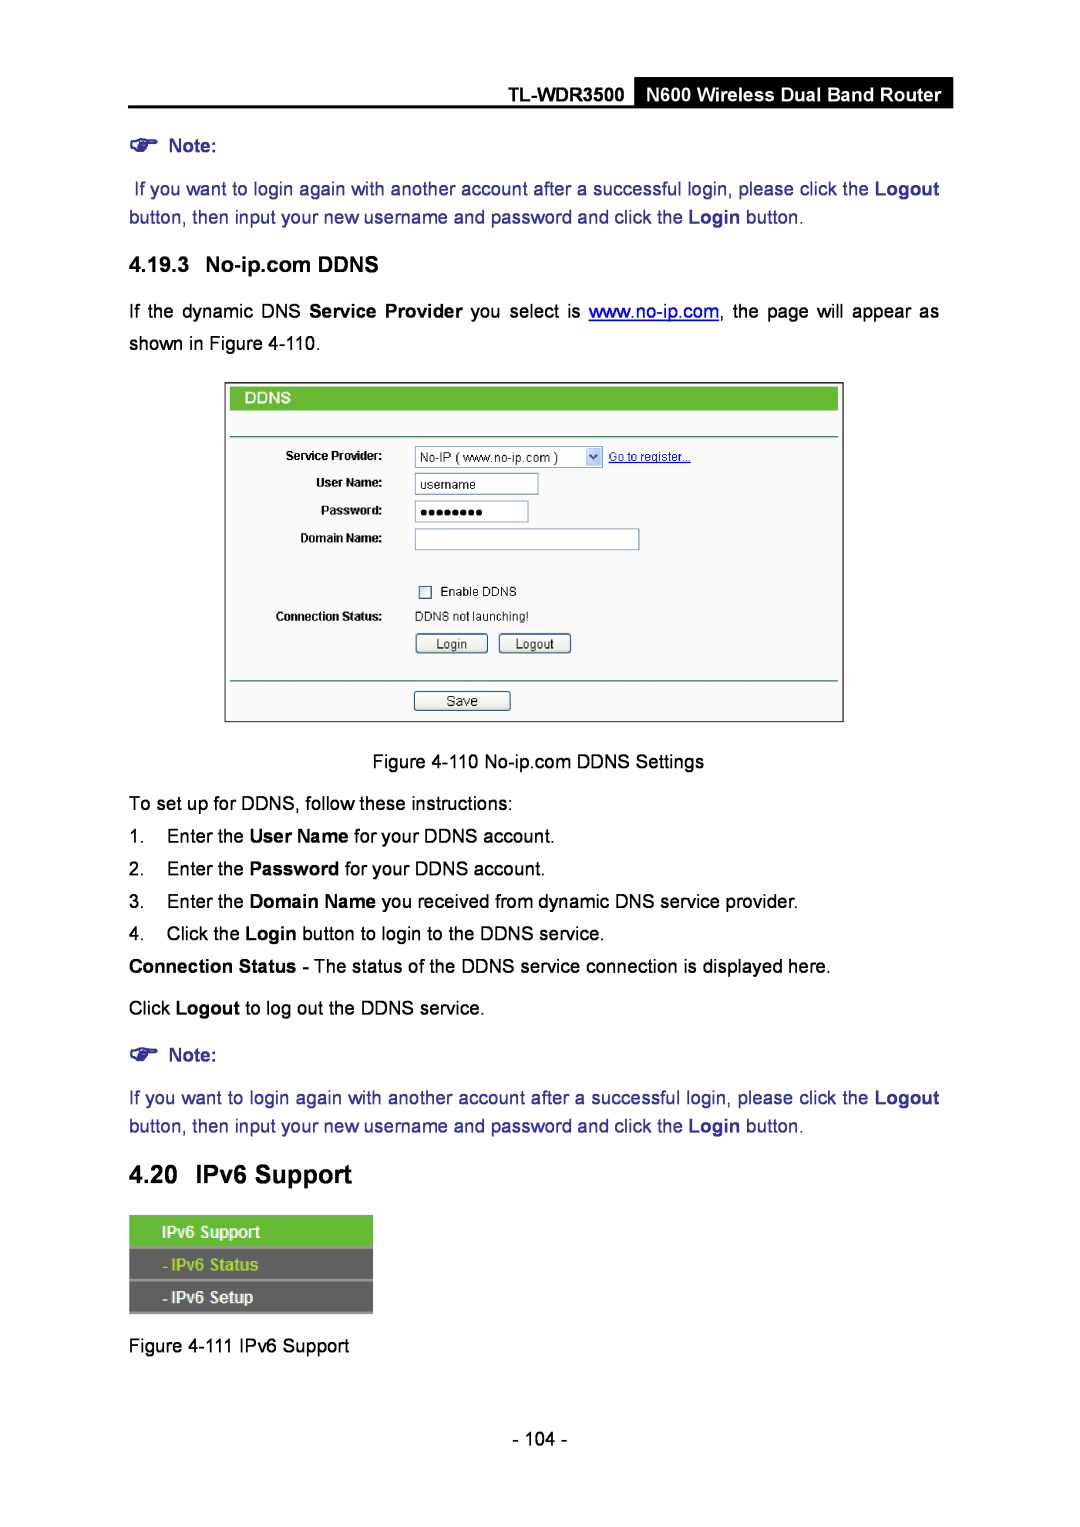 TP-Link manual 4.20 IPv6 Support, No-ip.com DDNS, TL-WDR3500 N600 Wireless Dual Band Router,  Note 